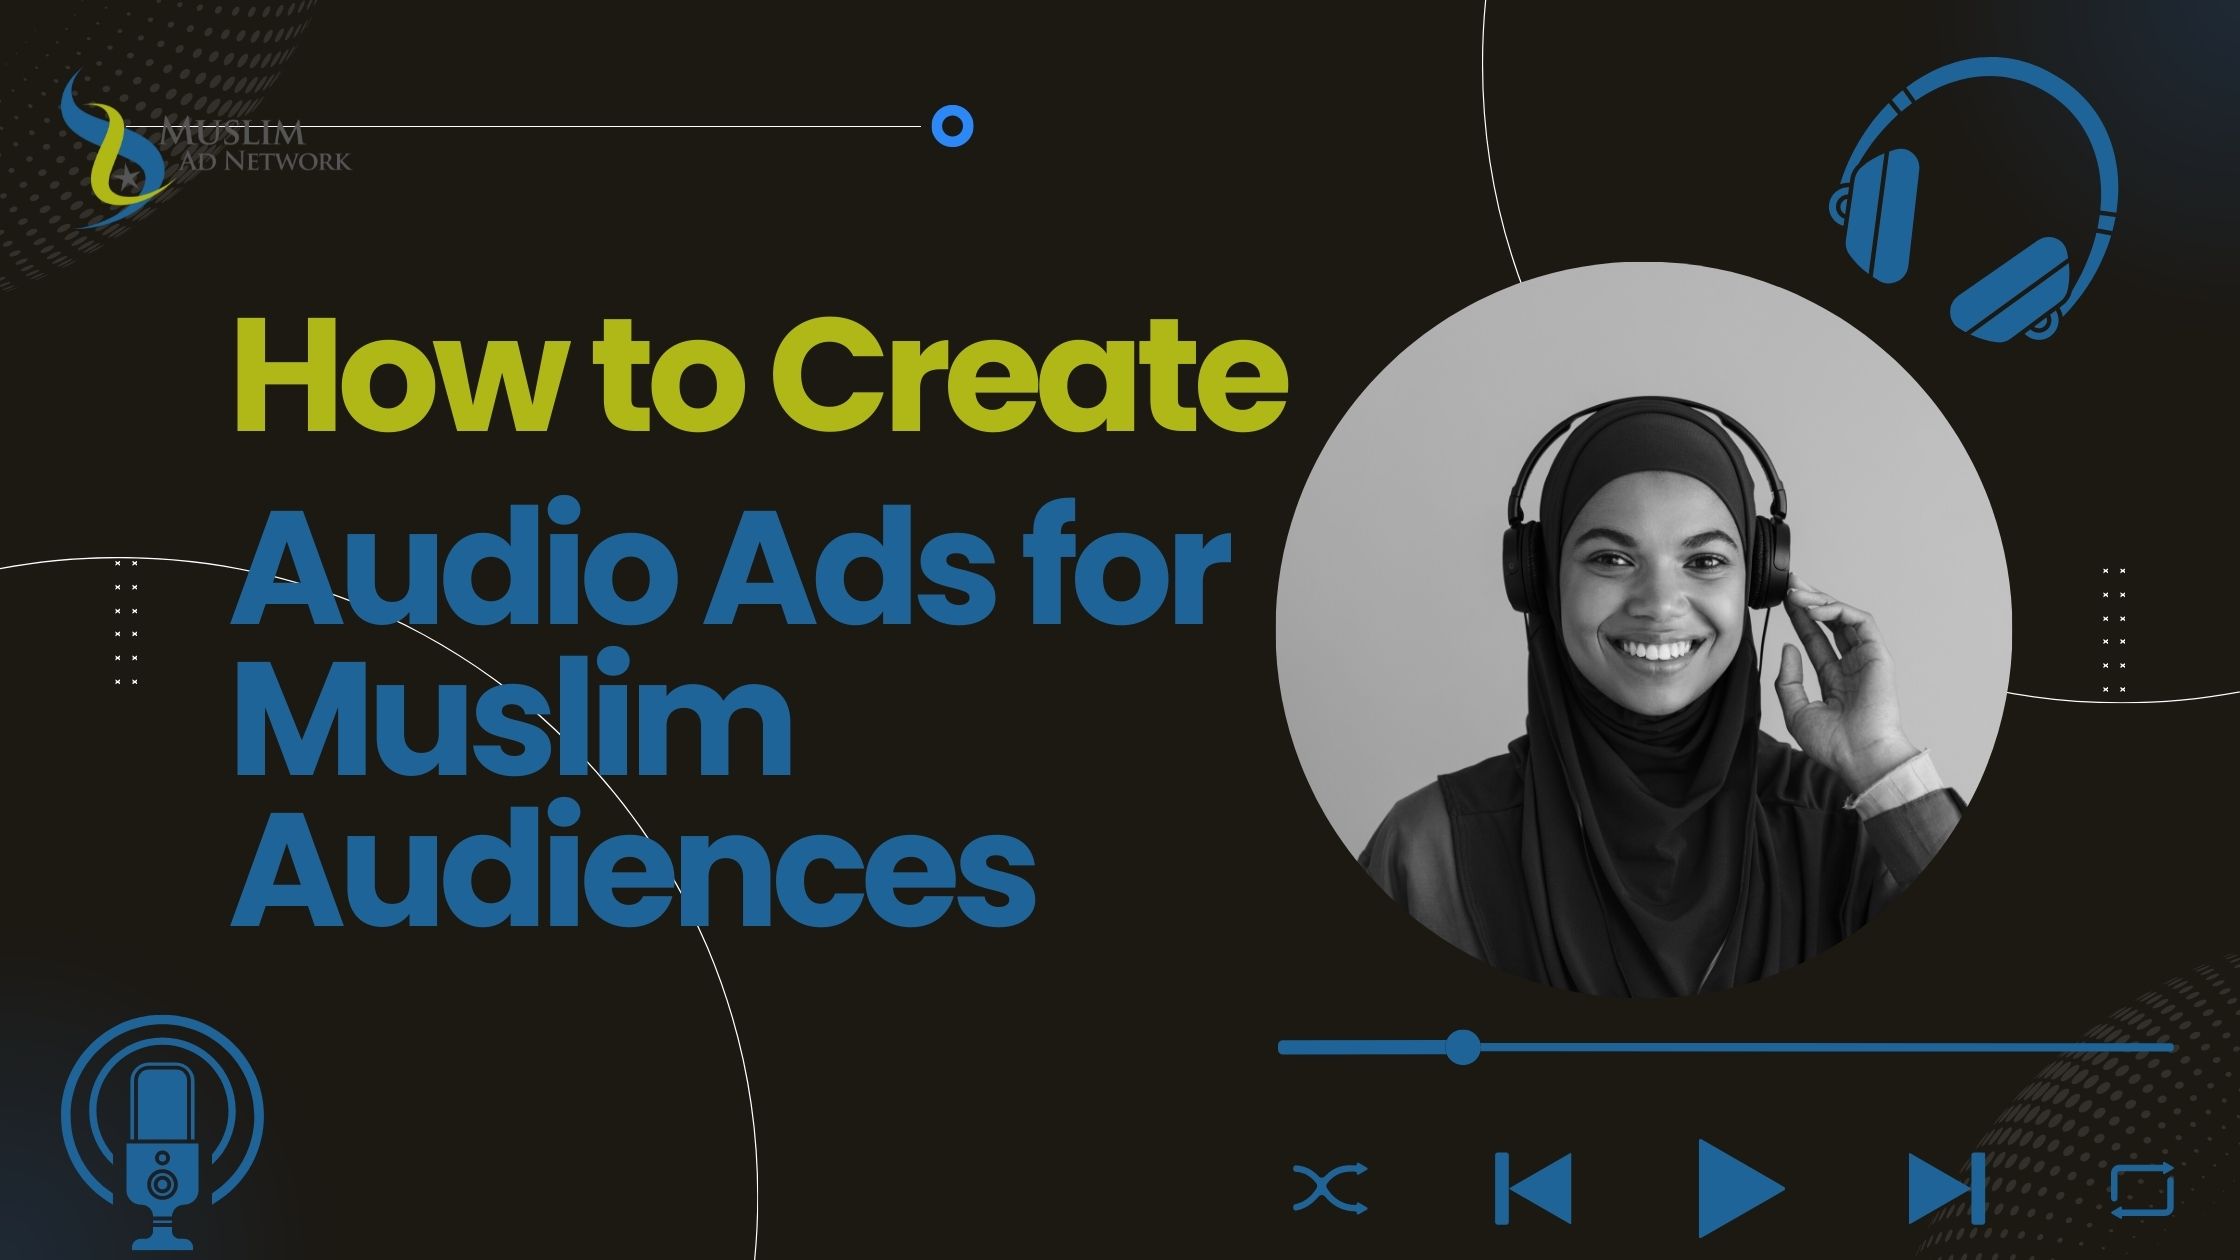 How to Create Audio Ads for Your Muslim Audience